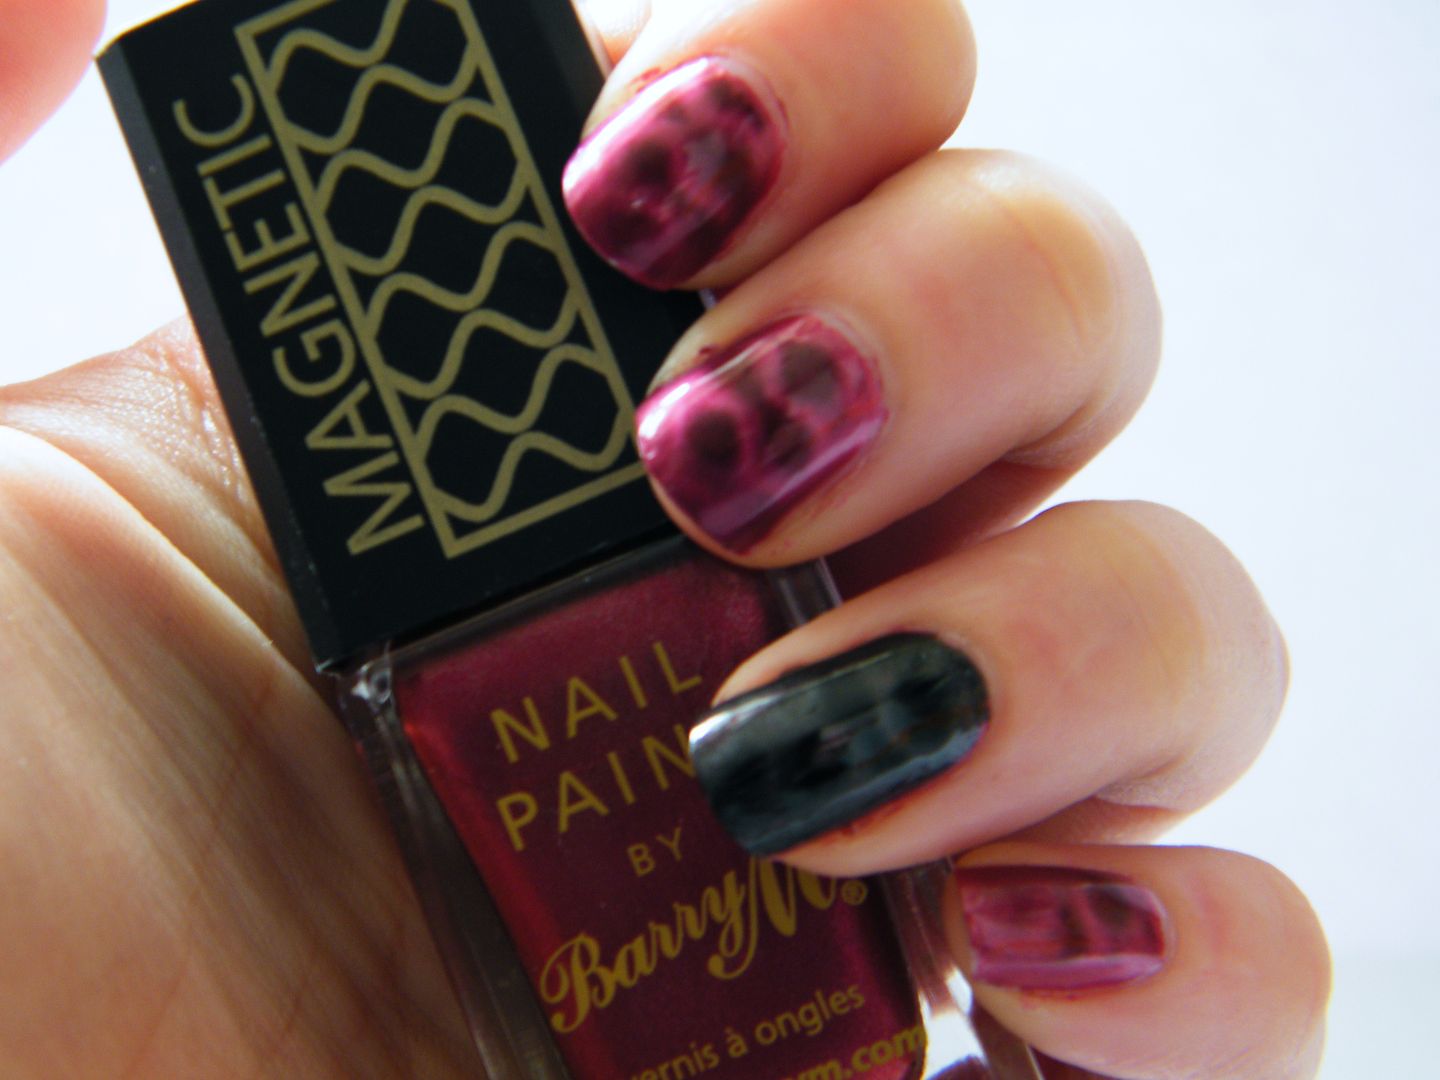 Barry M Magnetic Nail Polish in Dark Silver and Magnetic Red